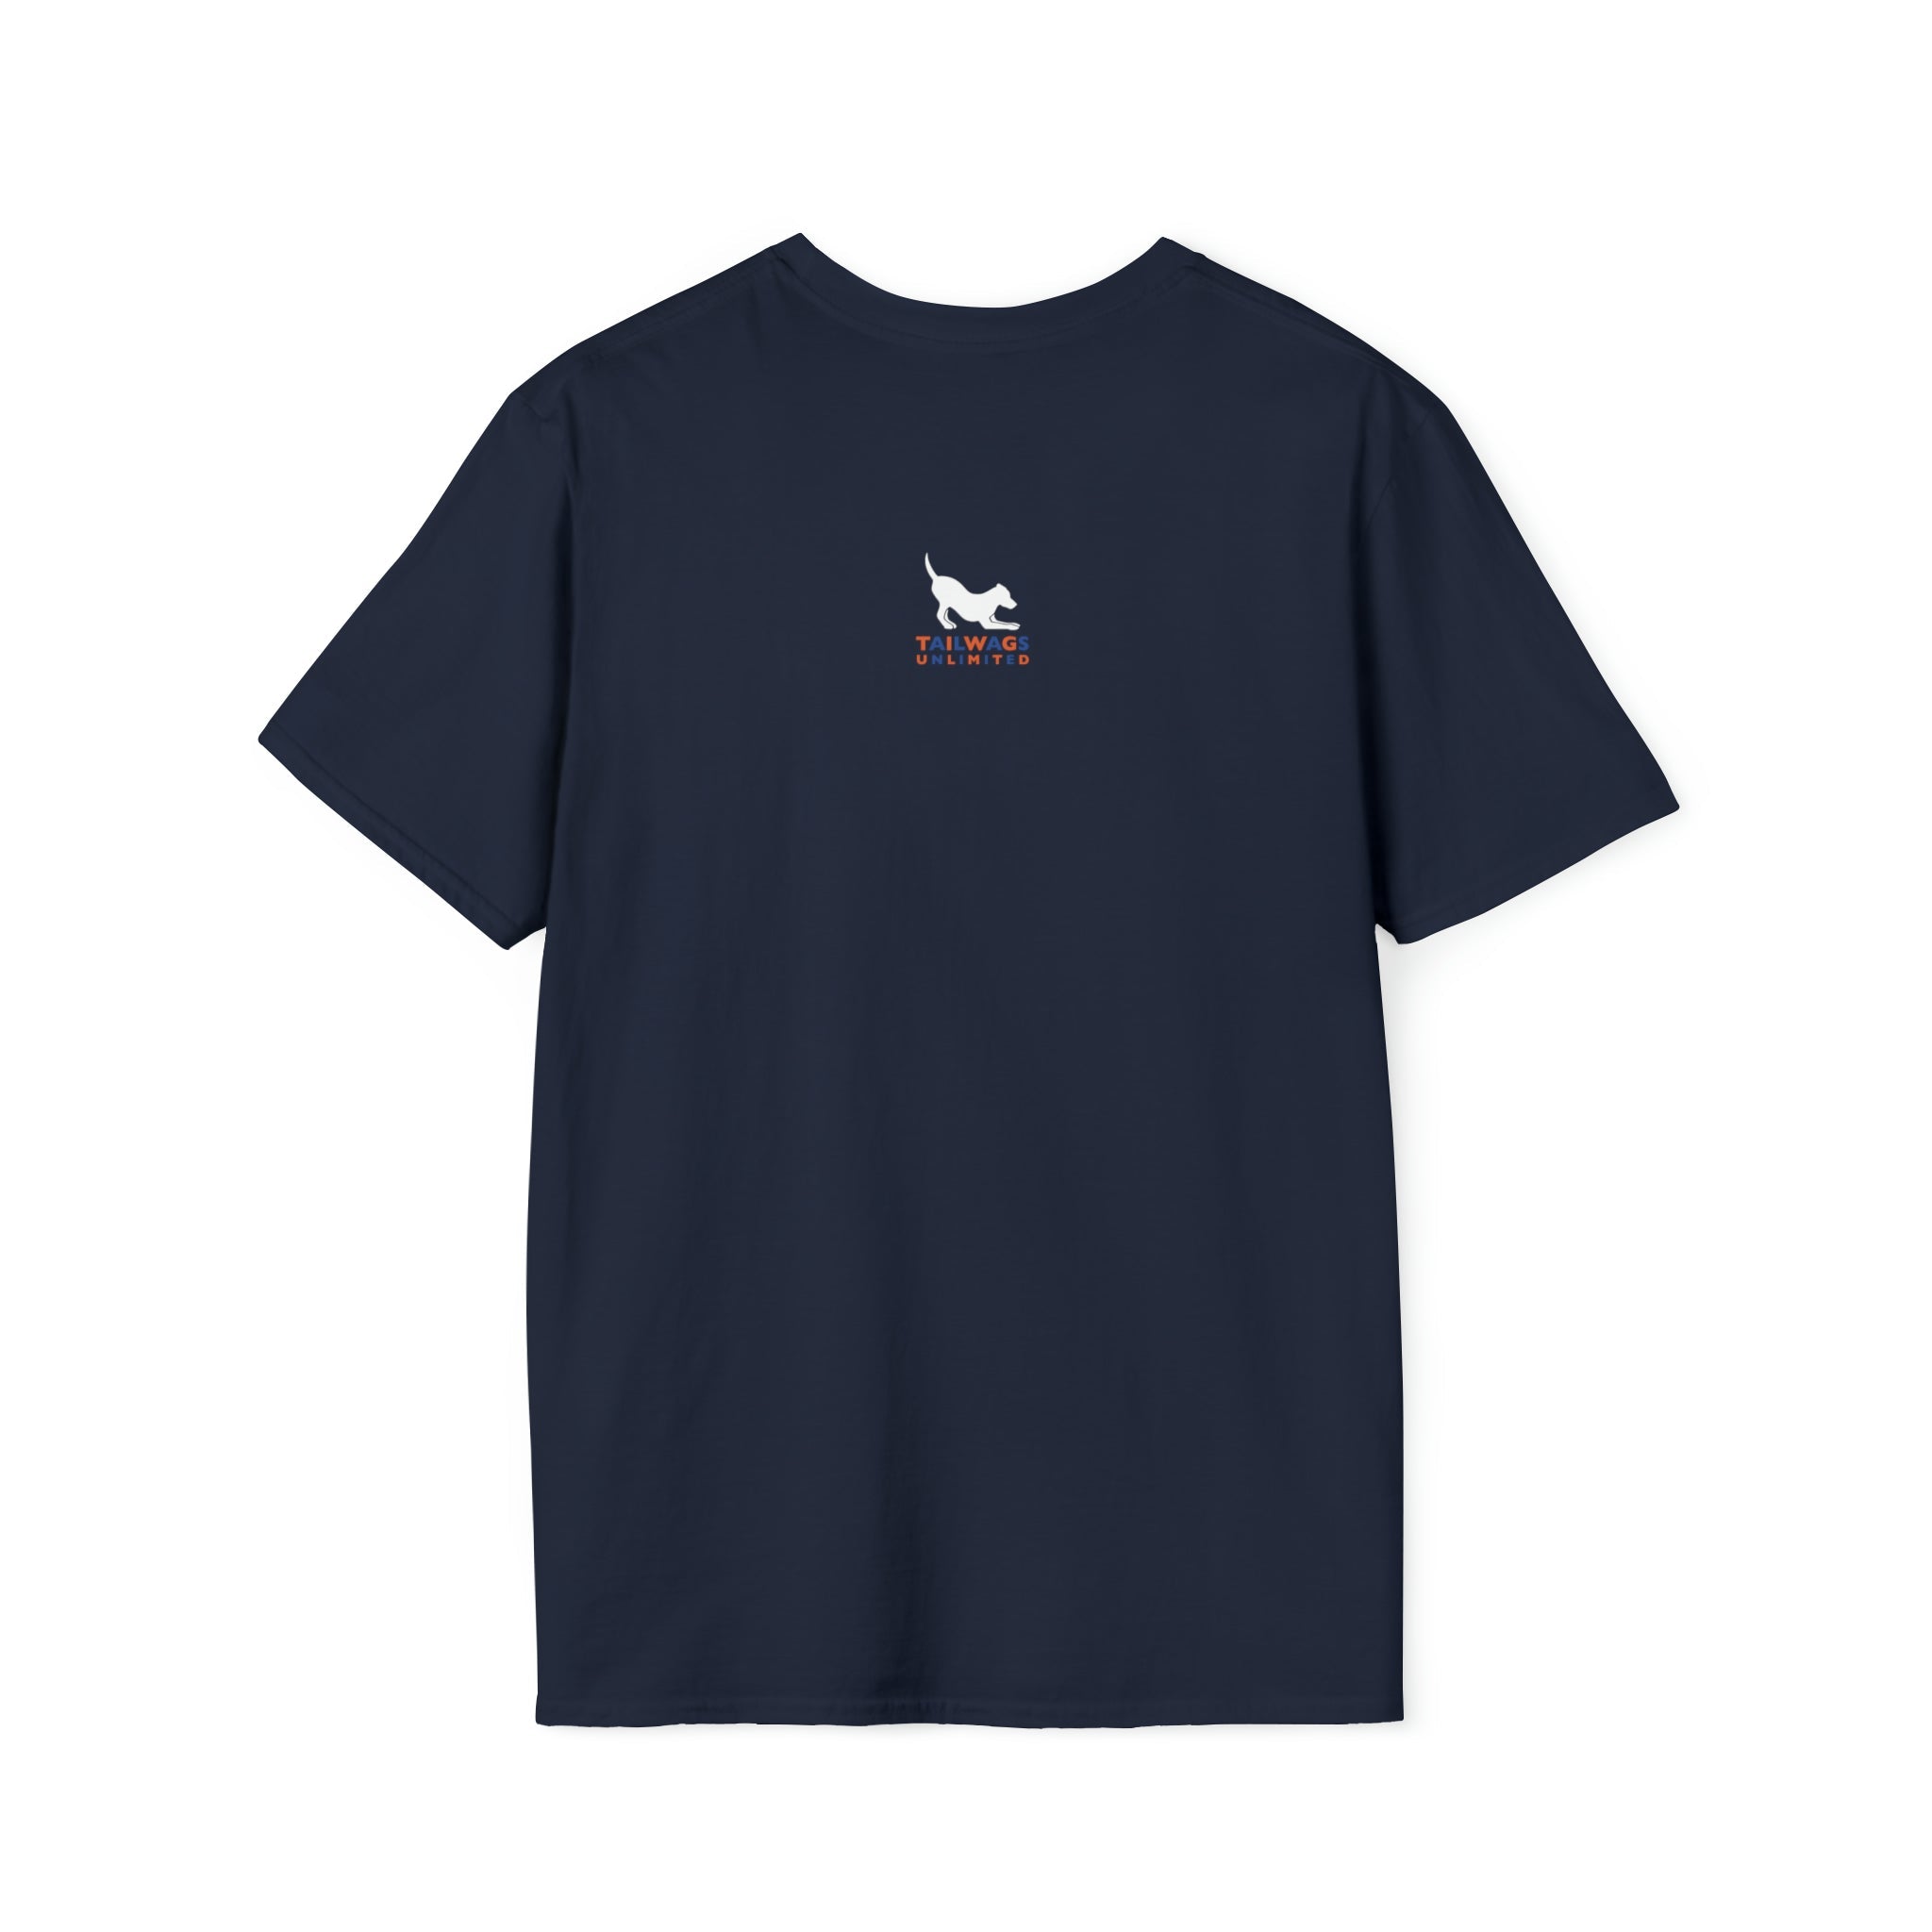 The Night Shift T-Shirt - TAILWAGS UNLIMITED